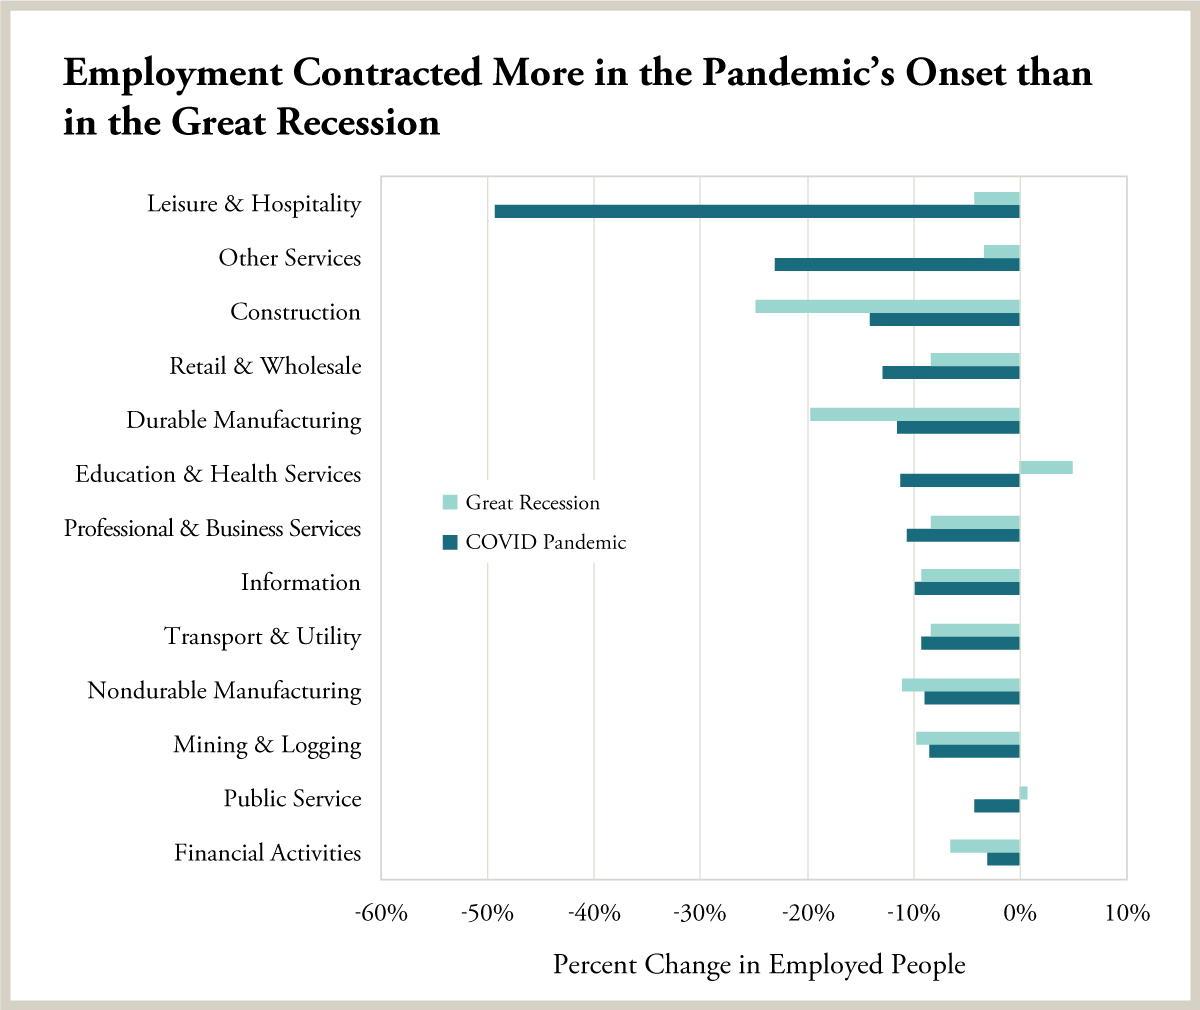 Employment Contracted More in the Pandemic’s Onset than in the Great Recession